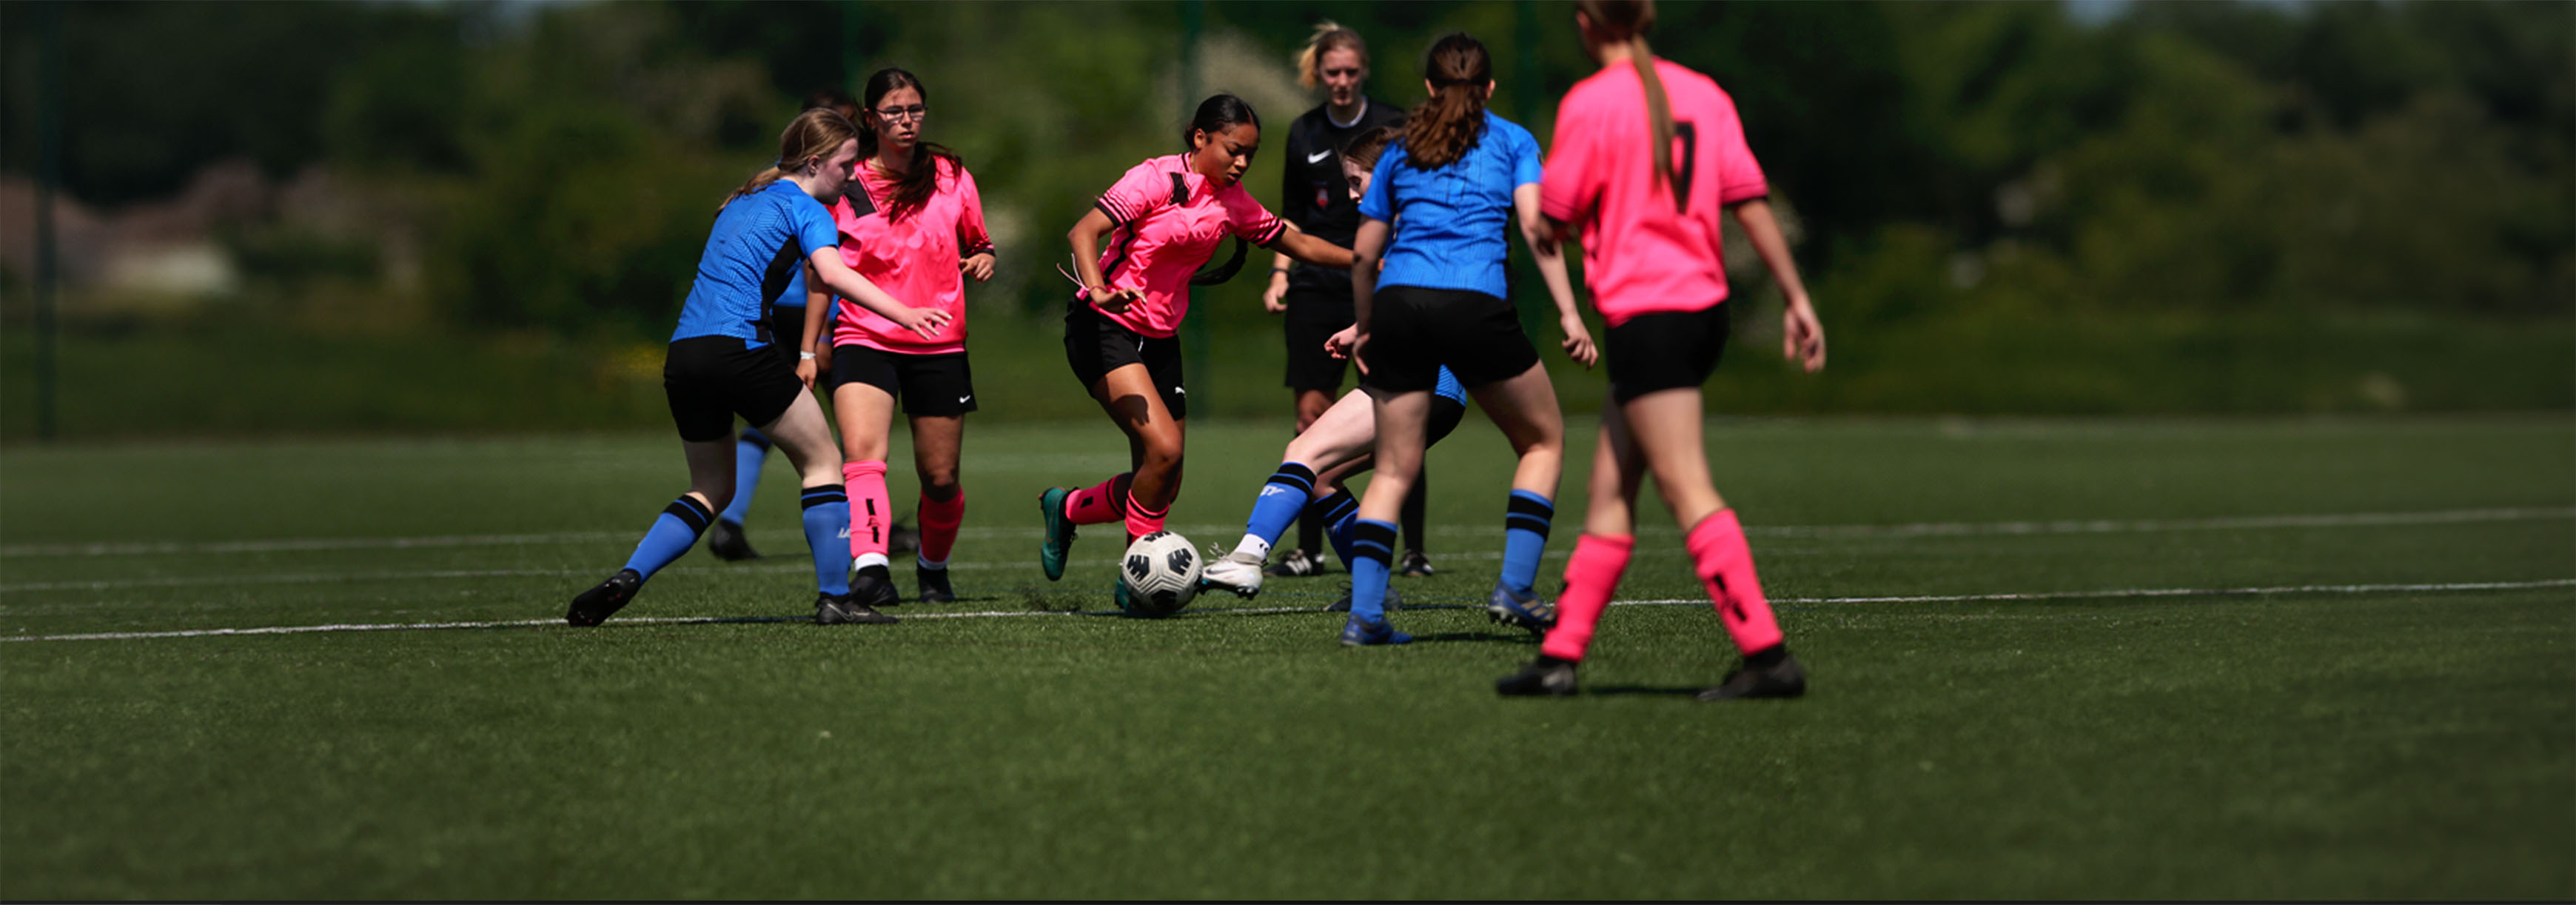 During a game, a player dribbles forward with the ball, with three opponents and two teammates in close proximity to her, and tries to avoid the challenge of a defender.